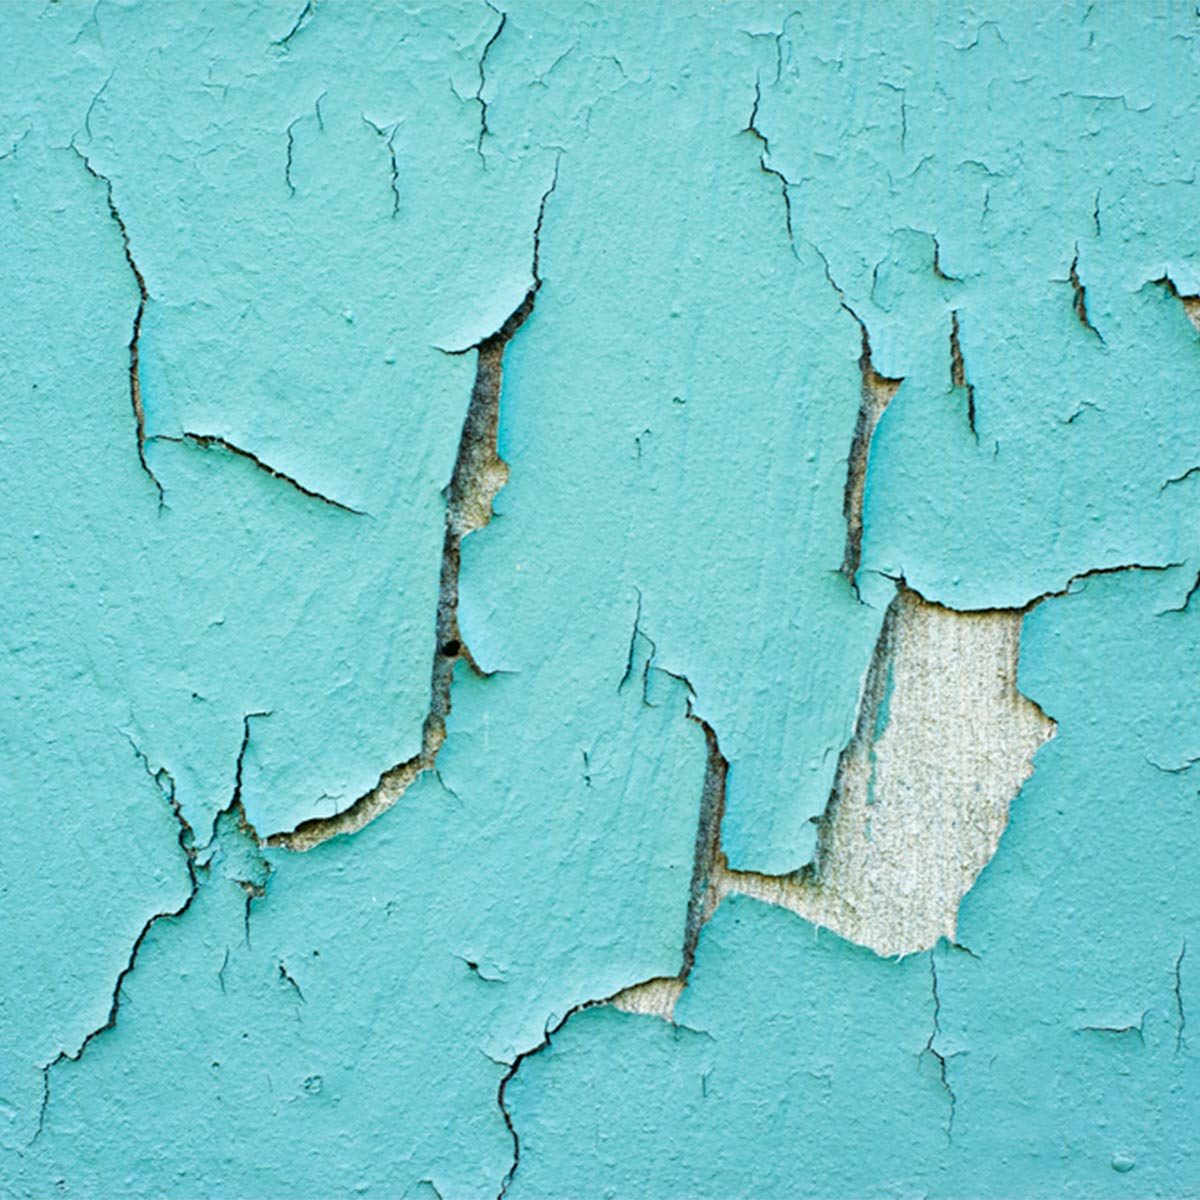 How To Remove Lead Paint Safely